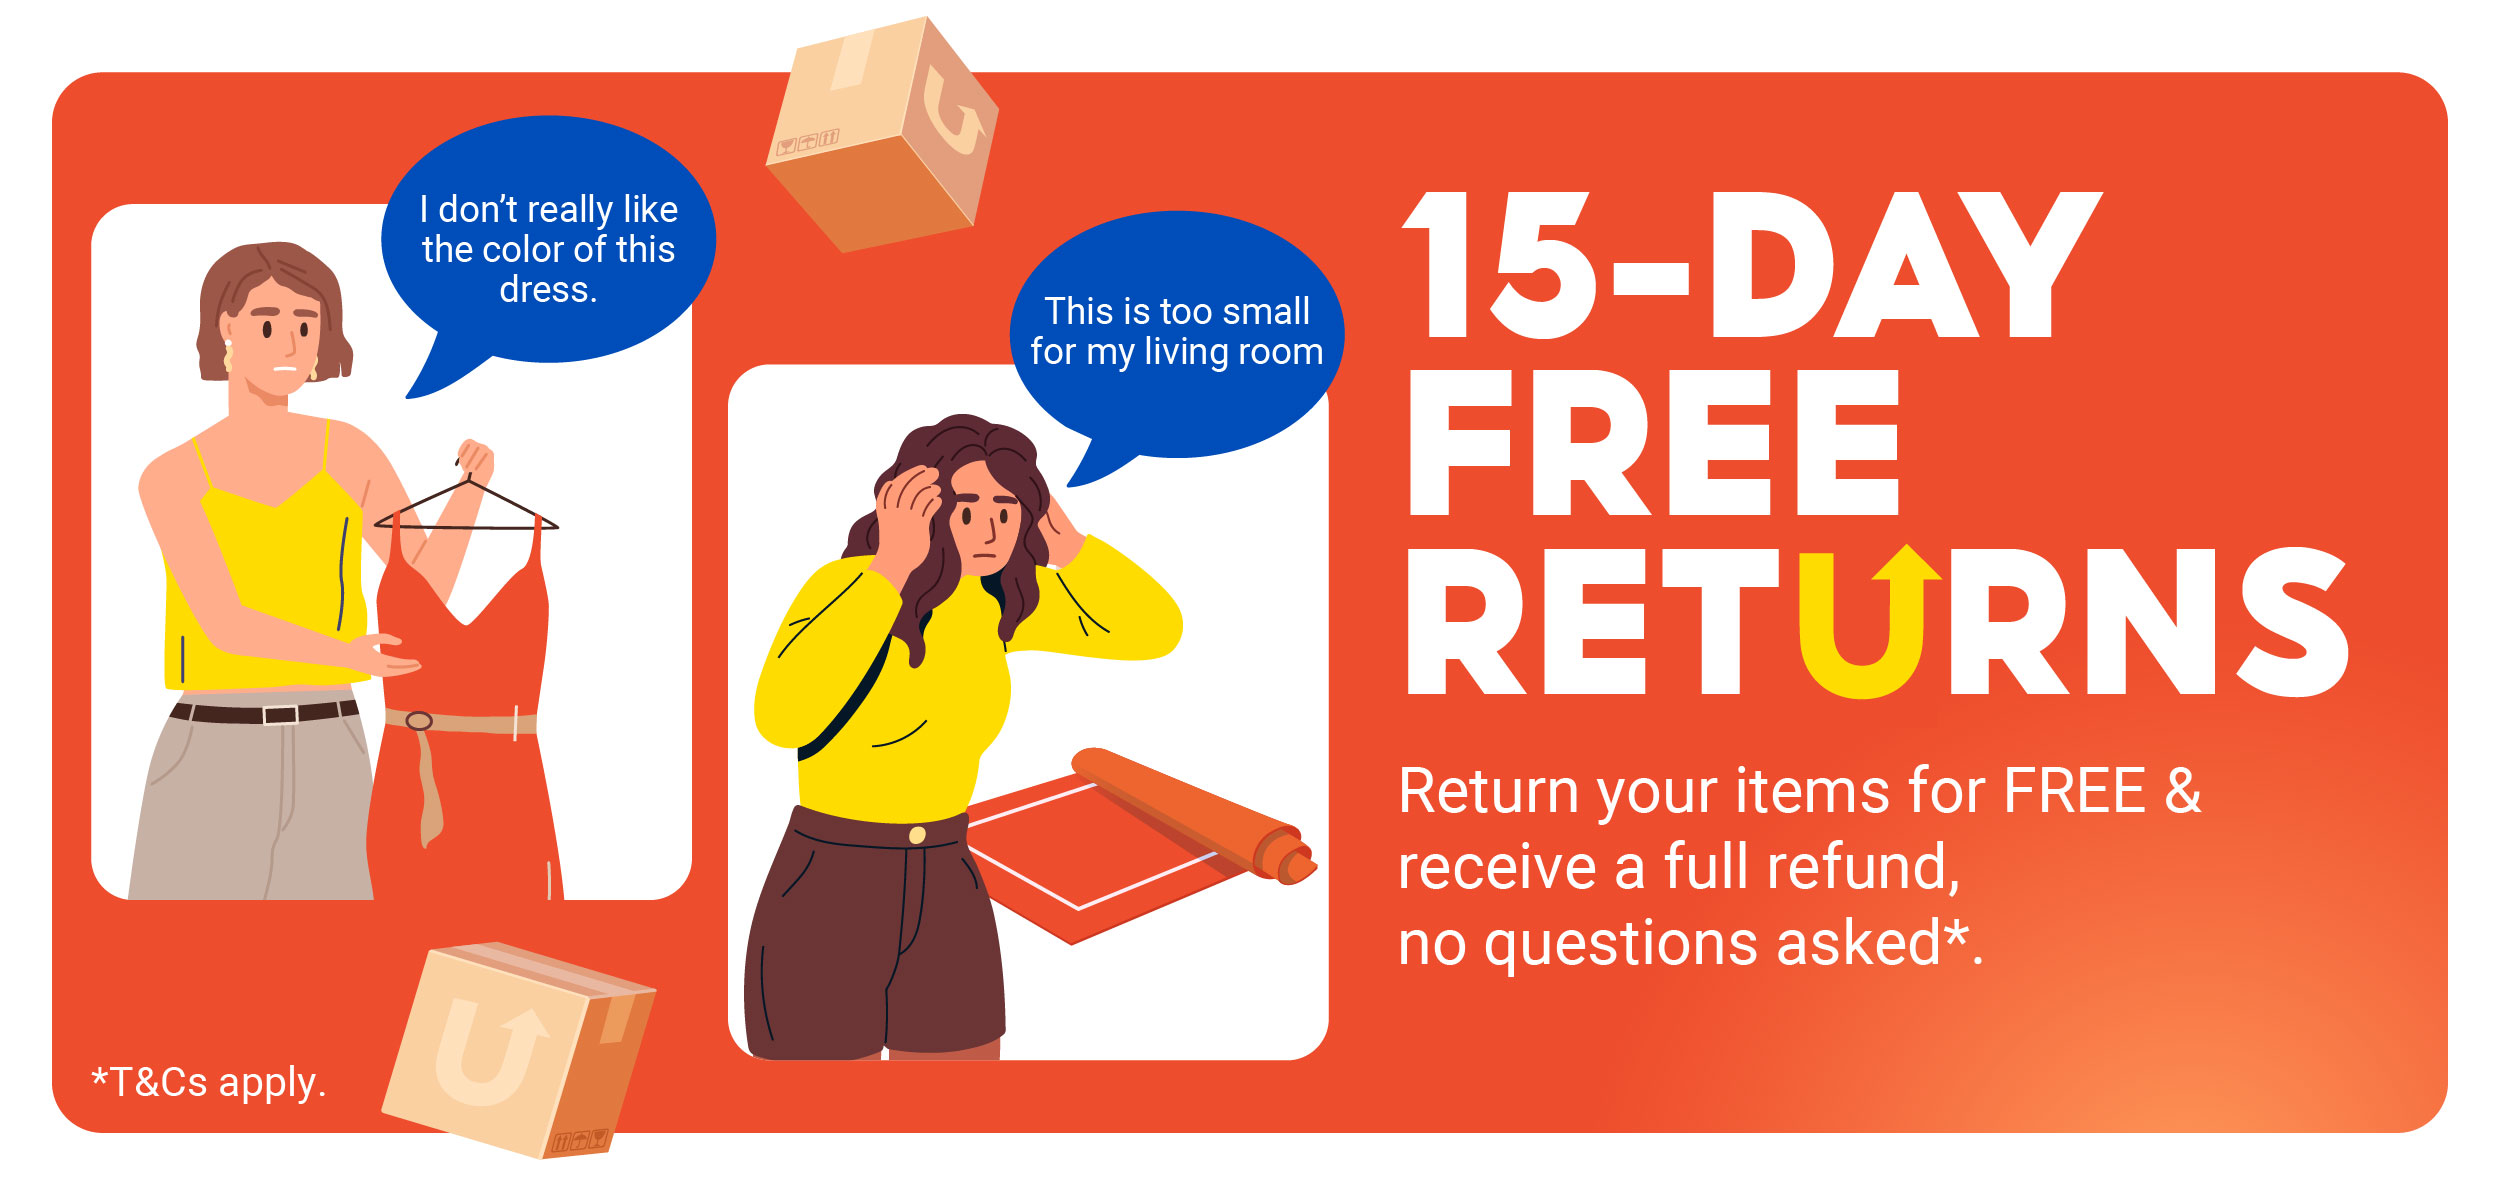 15-Day Free Returns, No Questions Asked*